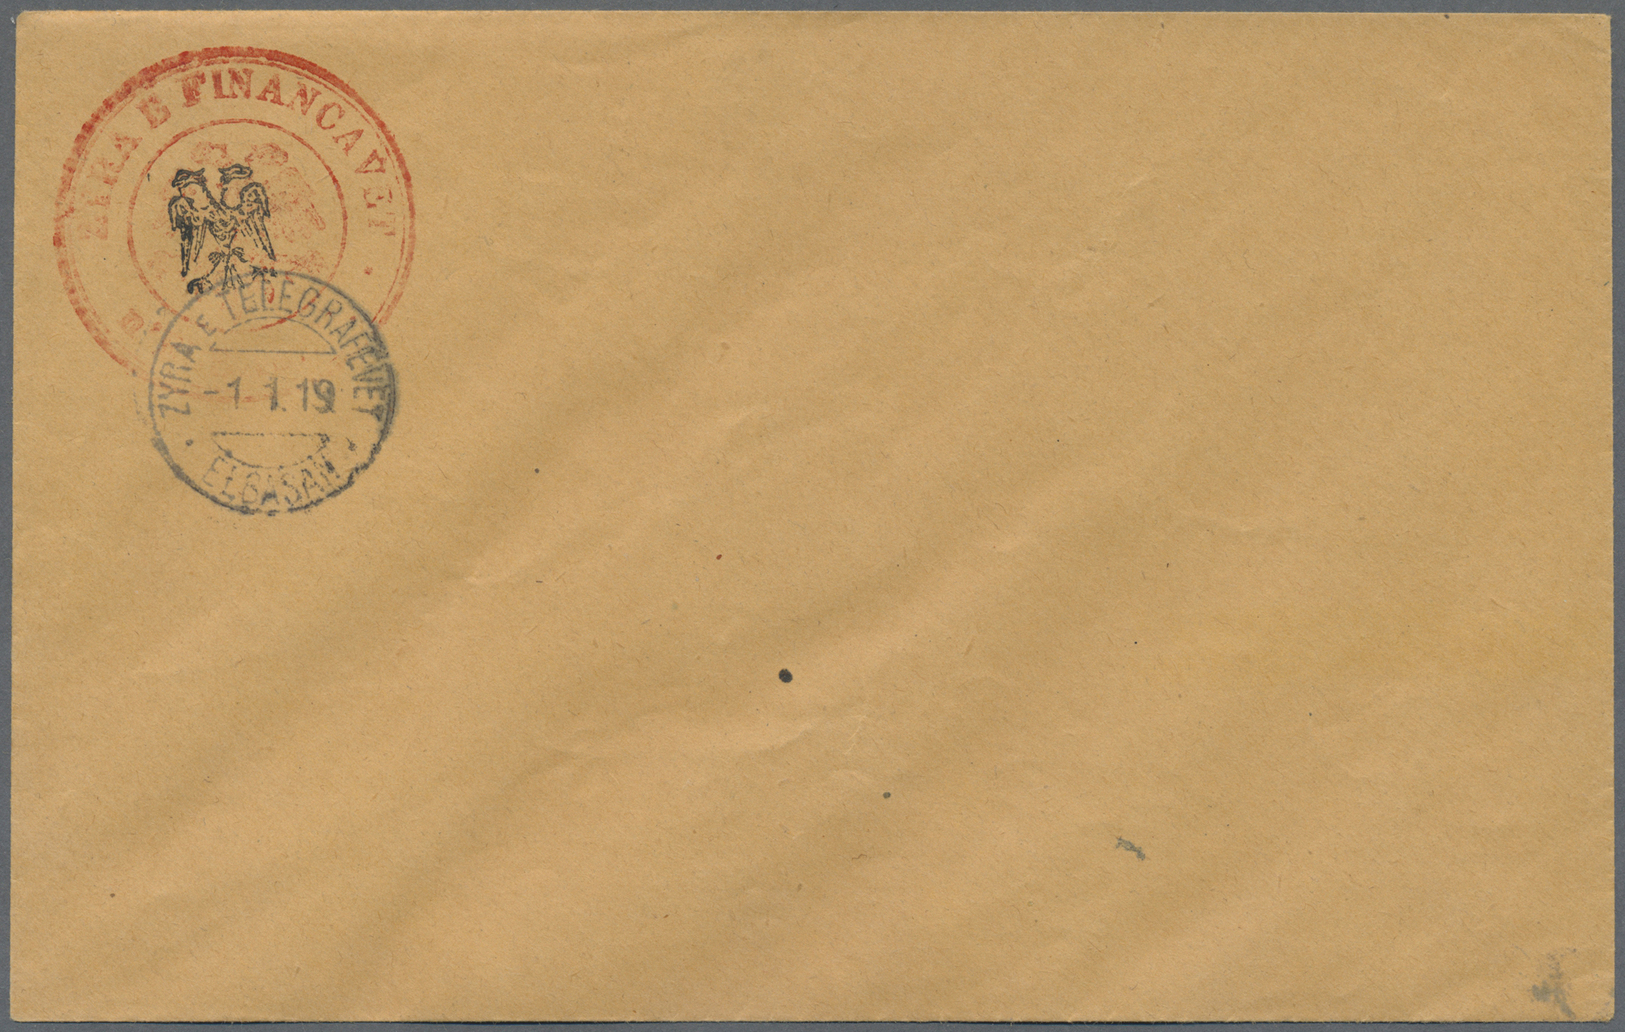 GA Albanien - Ganzsachen: 1919 LOCAL ISSUE ELBASAN: Stationery Envelope 1 Gr. With Red Double Eagle-cds "ZYRA FIN - Albania